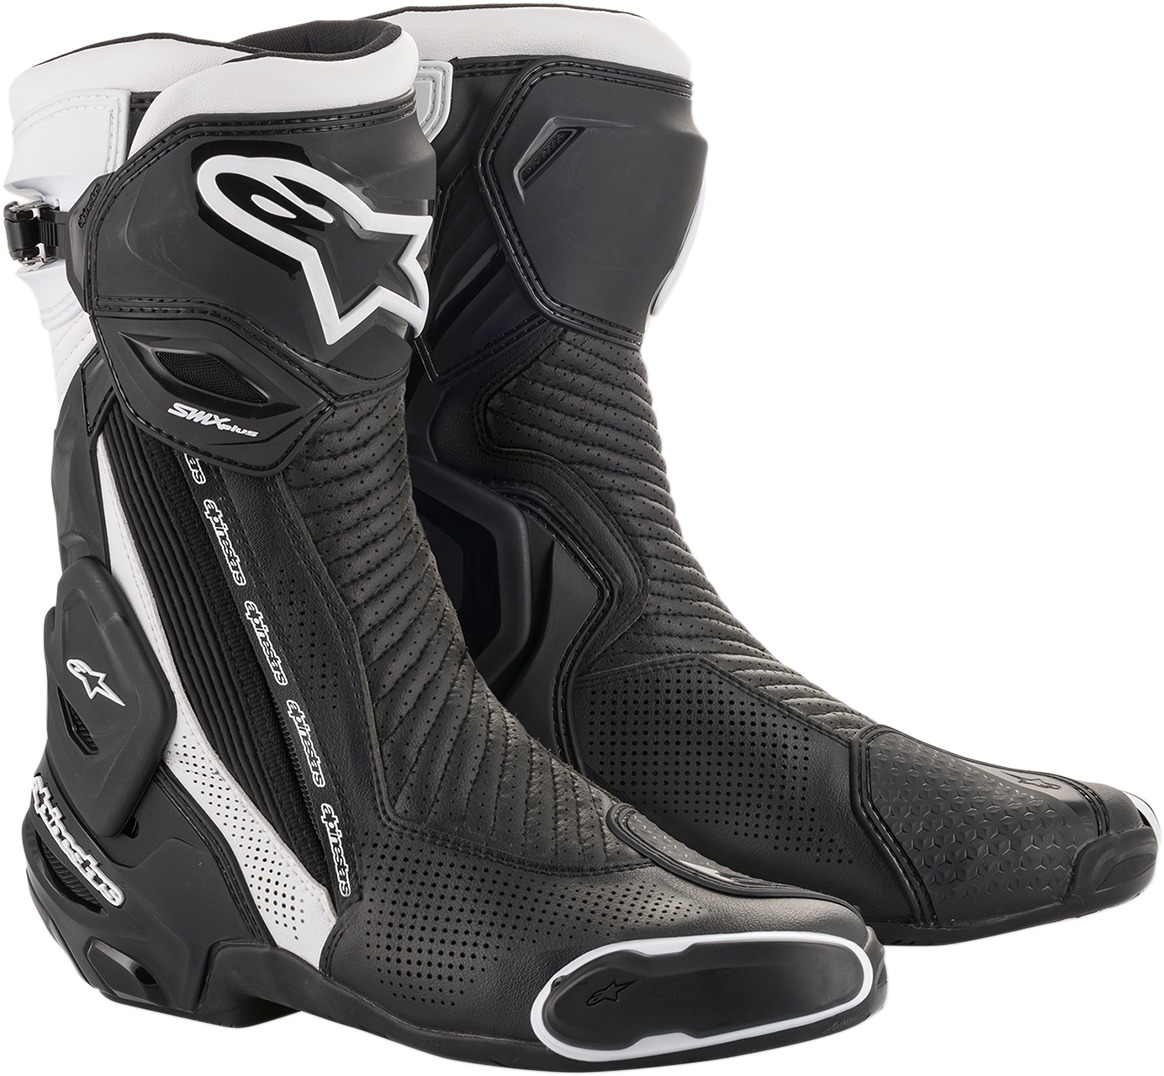 SMX Plus Street Riding Boots Black/White US 11.5 - Click Image to Close